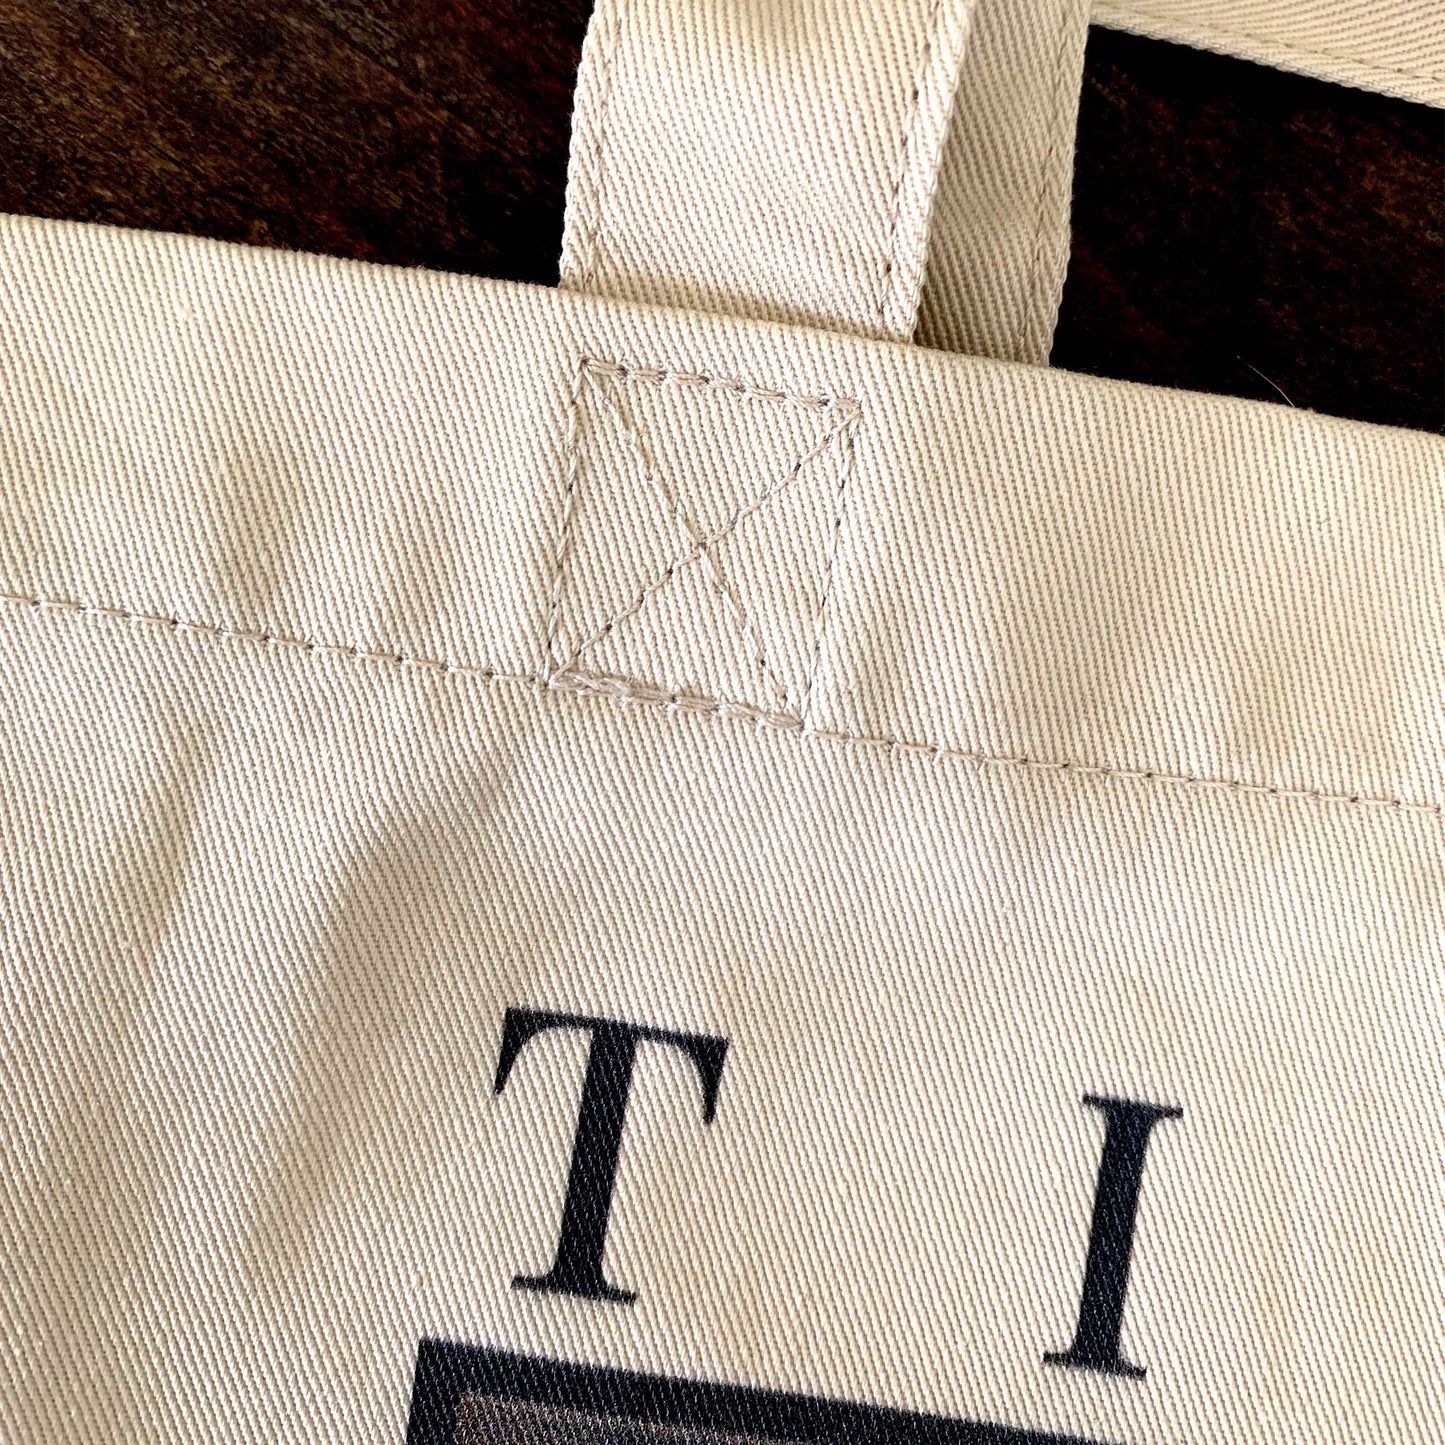 reinforced stitching on straps of eco friendly tote market bag